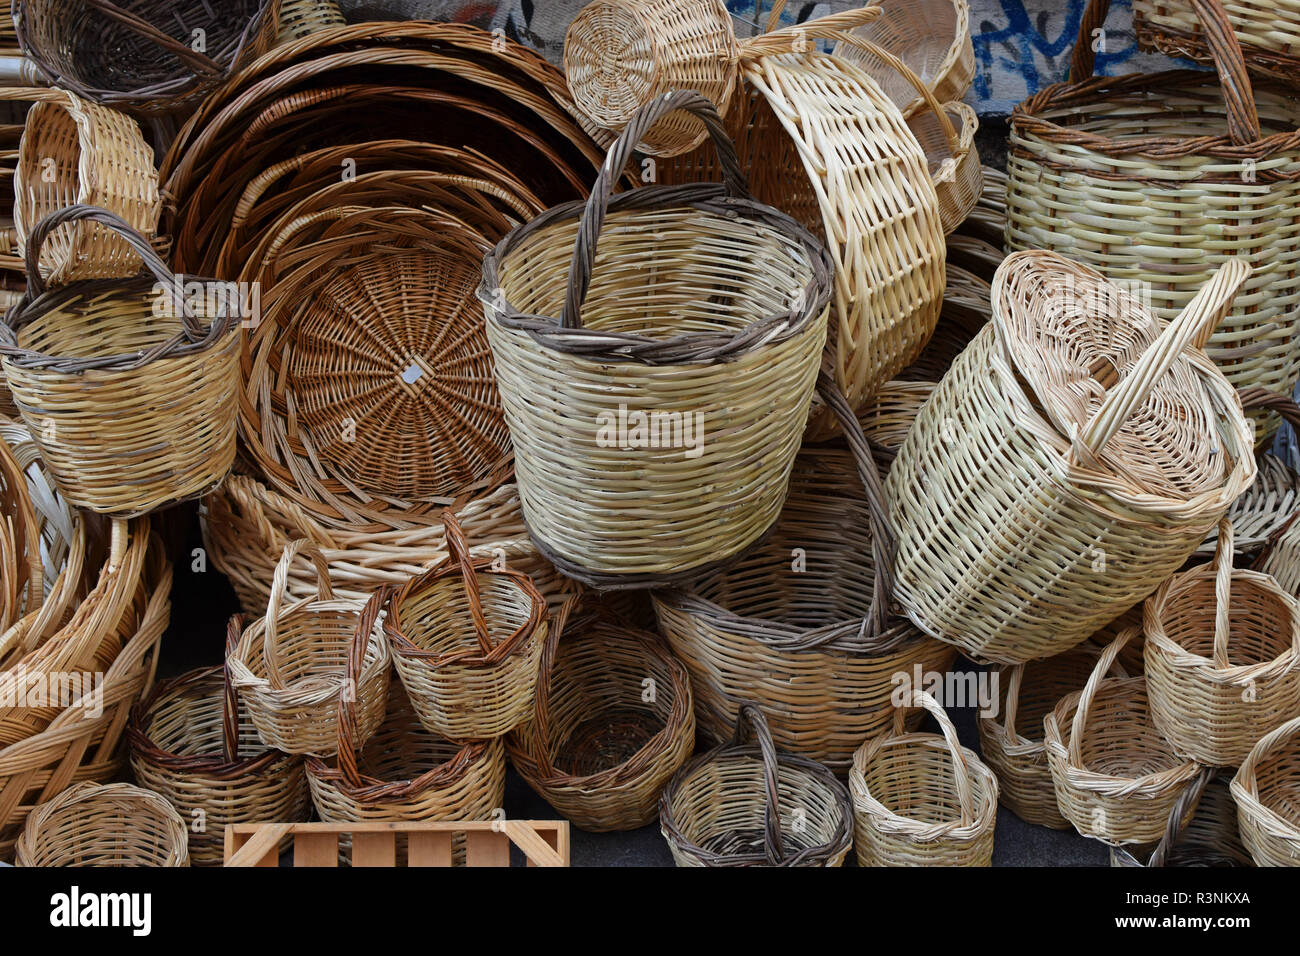 Traditional woven wicker baskets in various sizes. Stock Photo